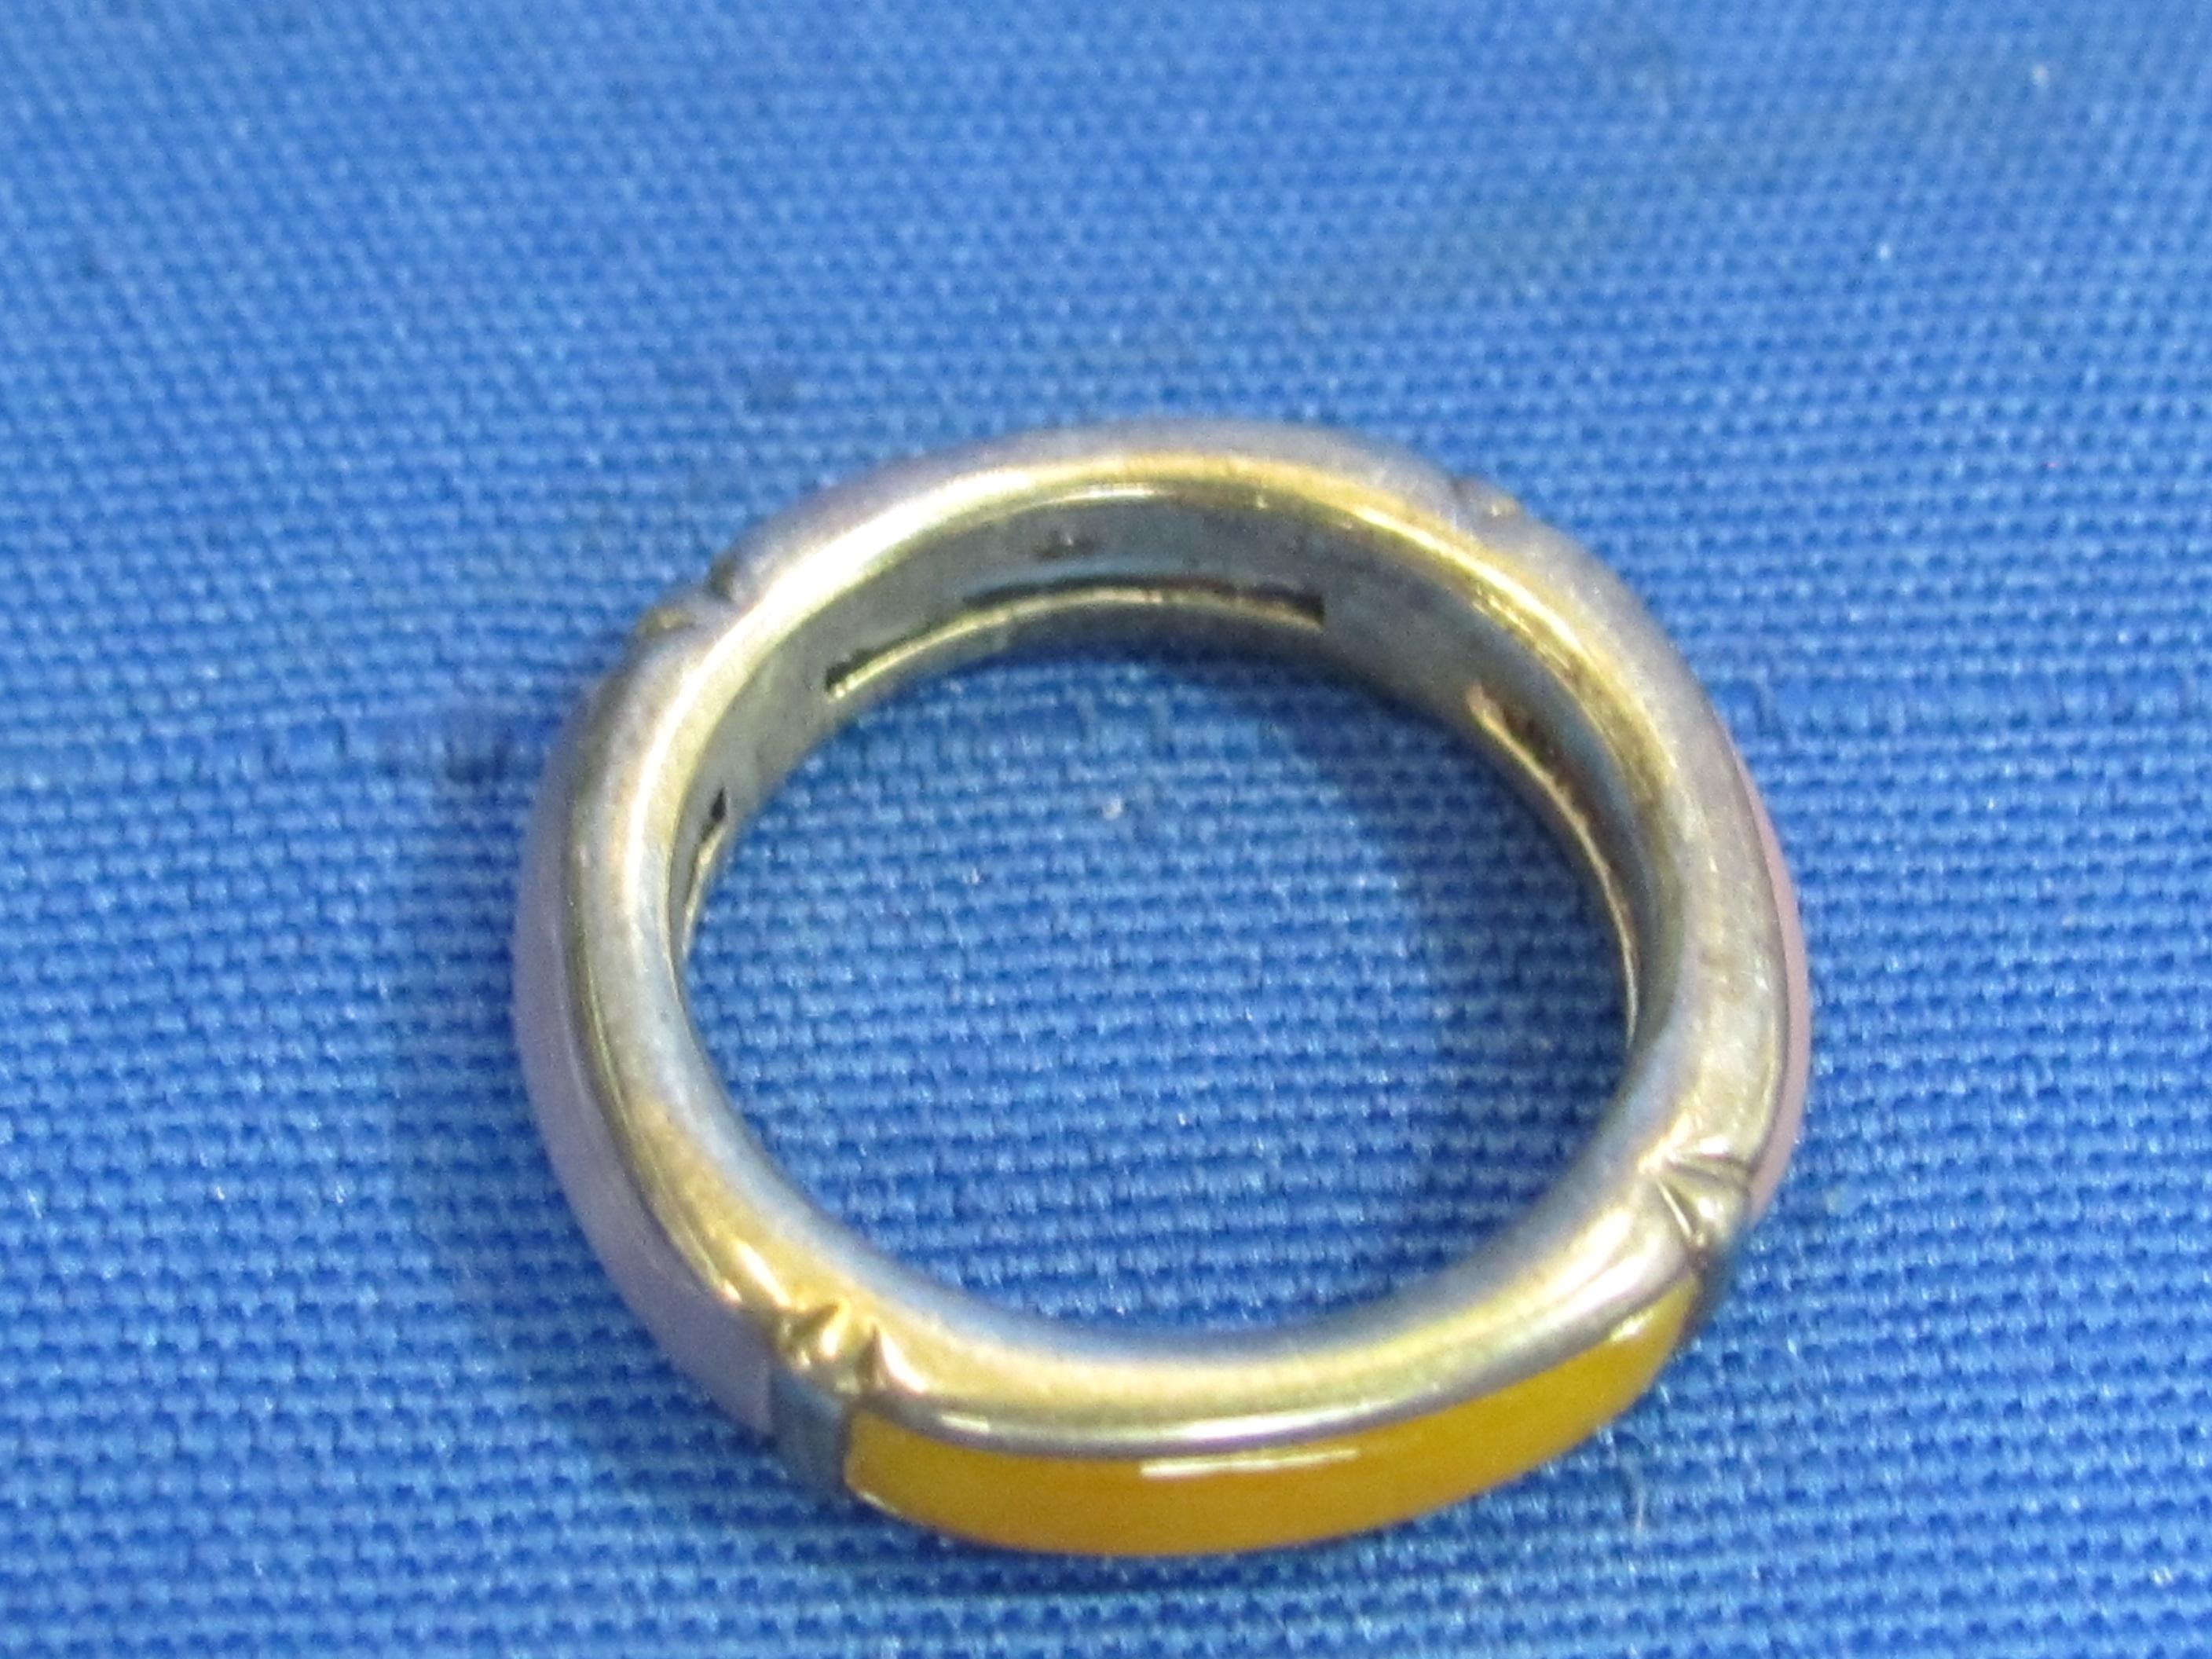 4 Sterling Silver Rings: Sizes 5 to 6 – Total weight is 15.6 grams